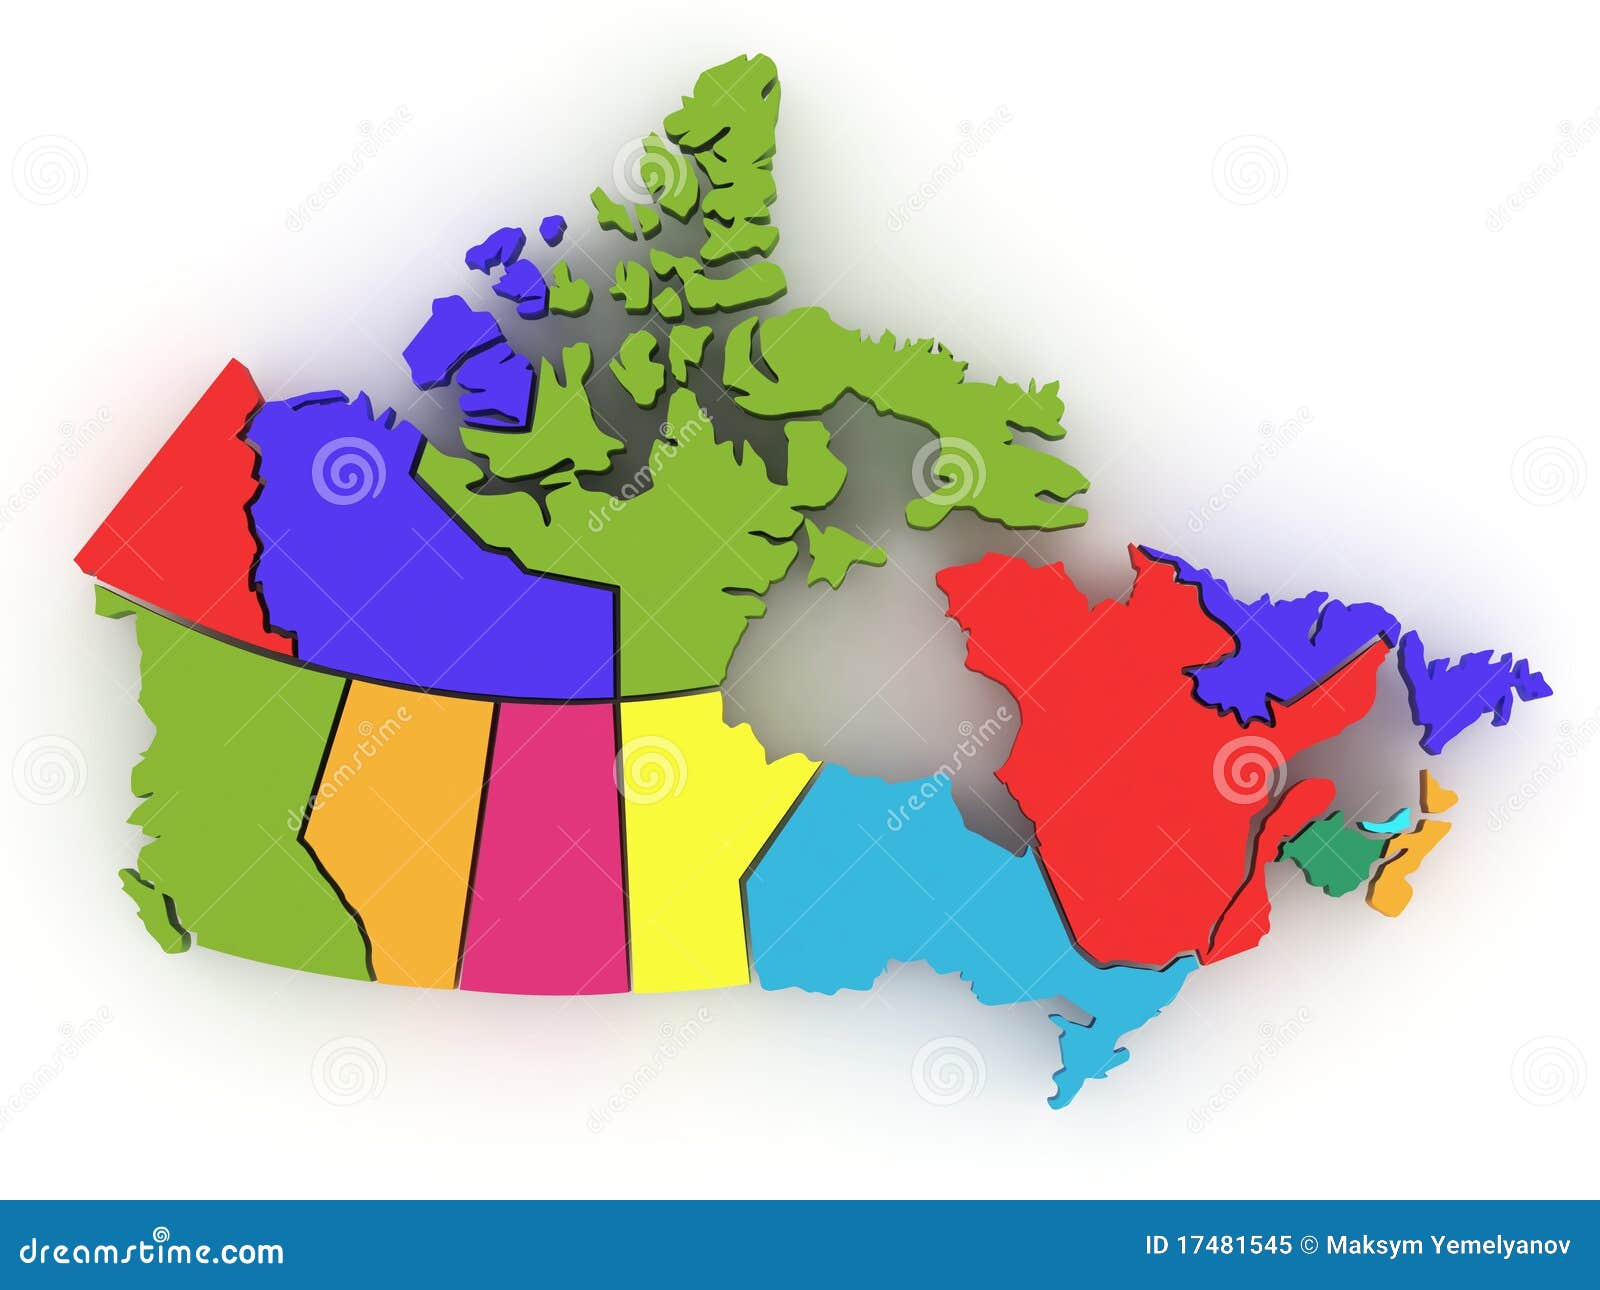 three-dimensional map of canada. 3d